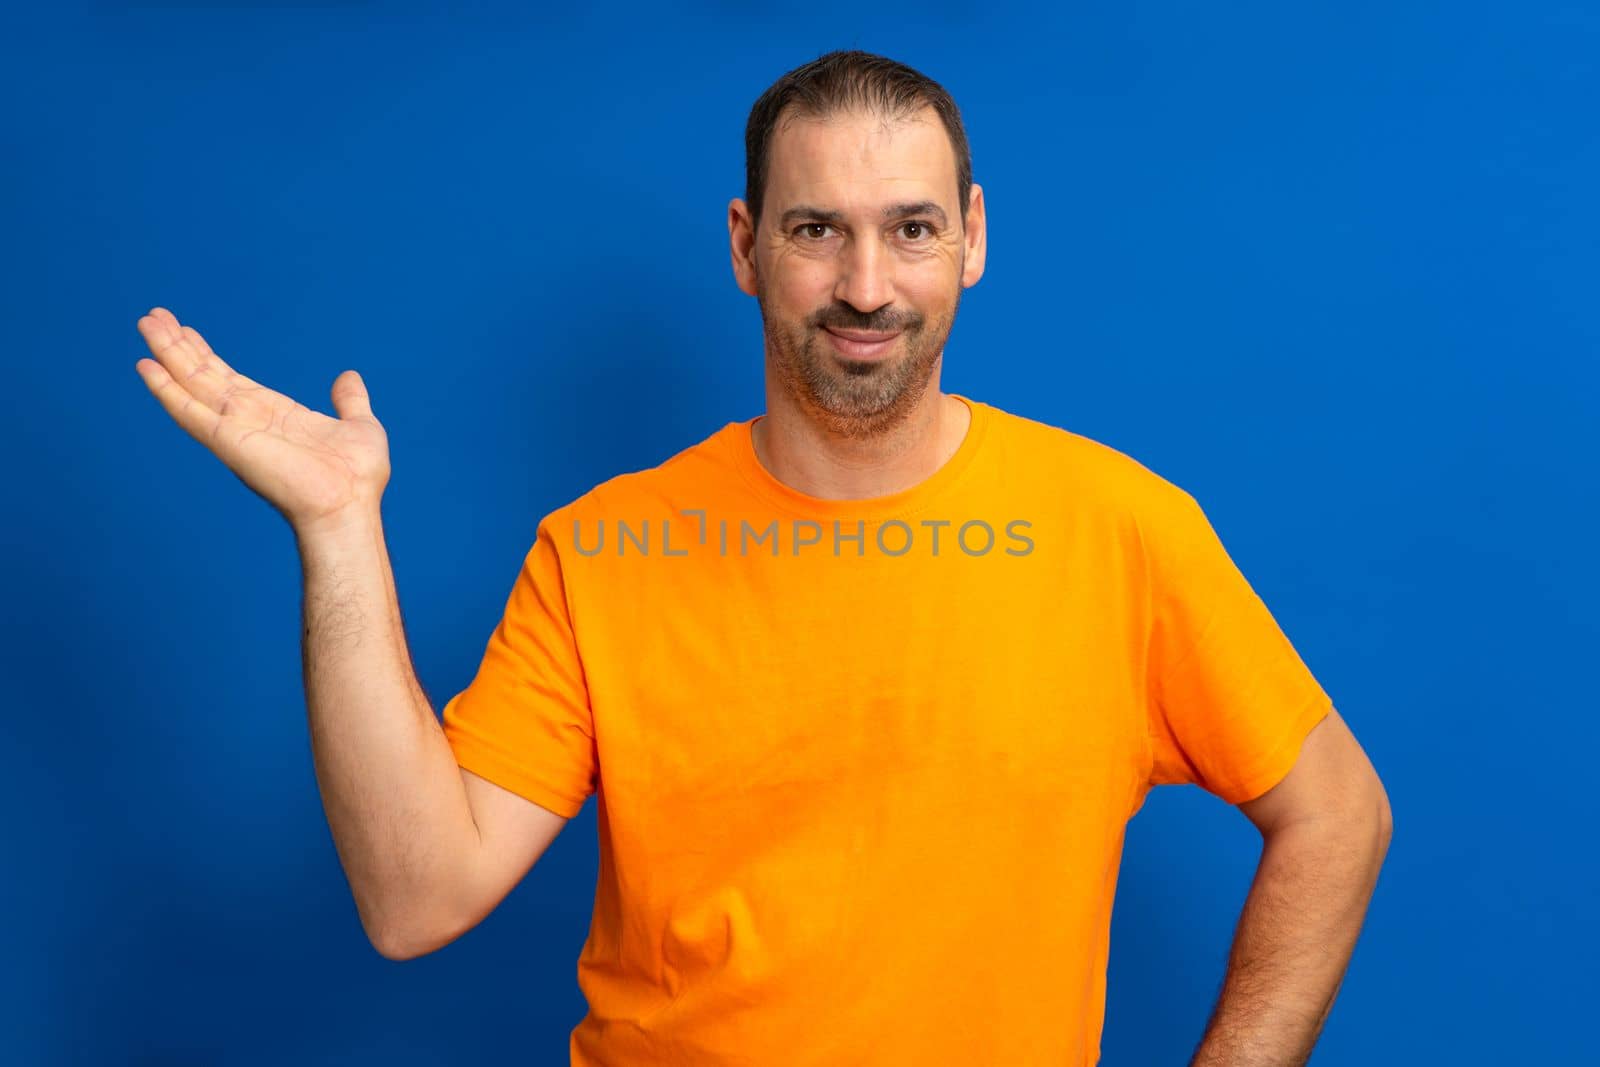 Handsome latino man offering something imaginary in the palm of his hand with friendly and affable attitude, isolated on blue studio background